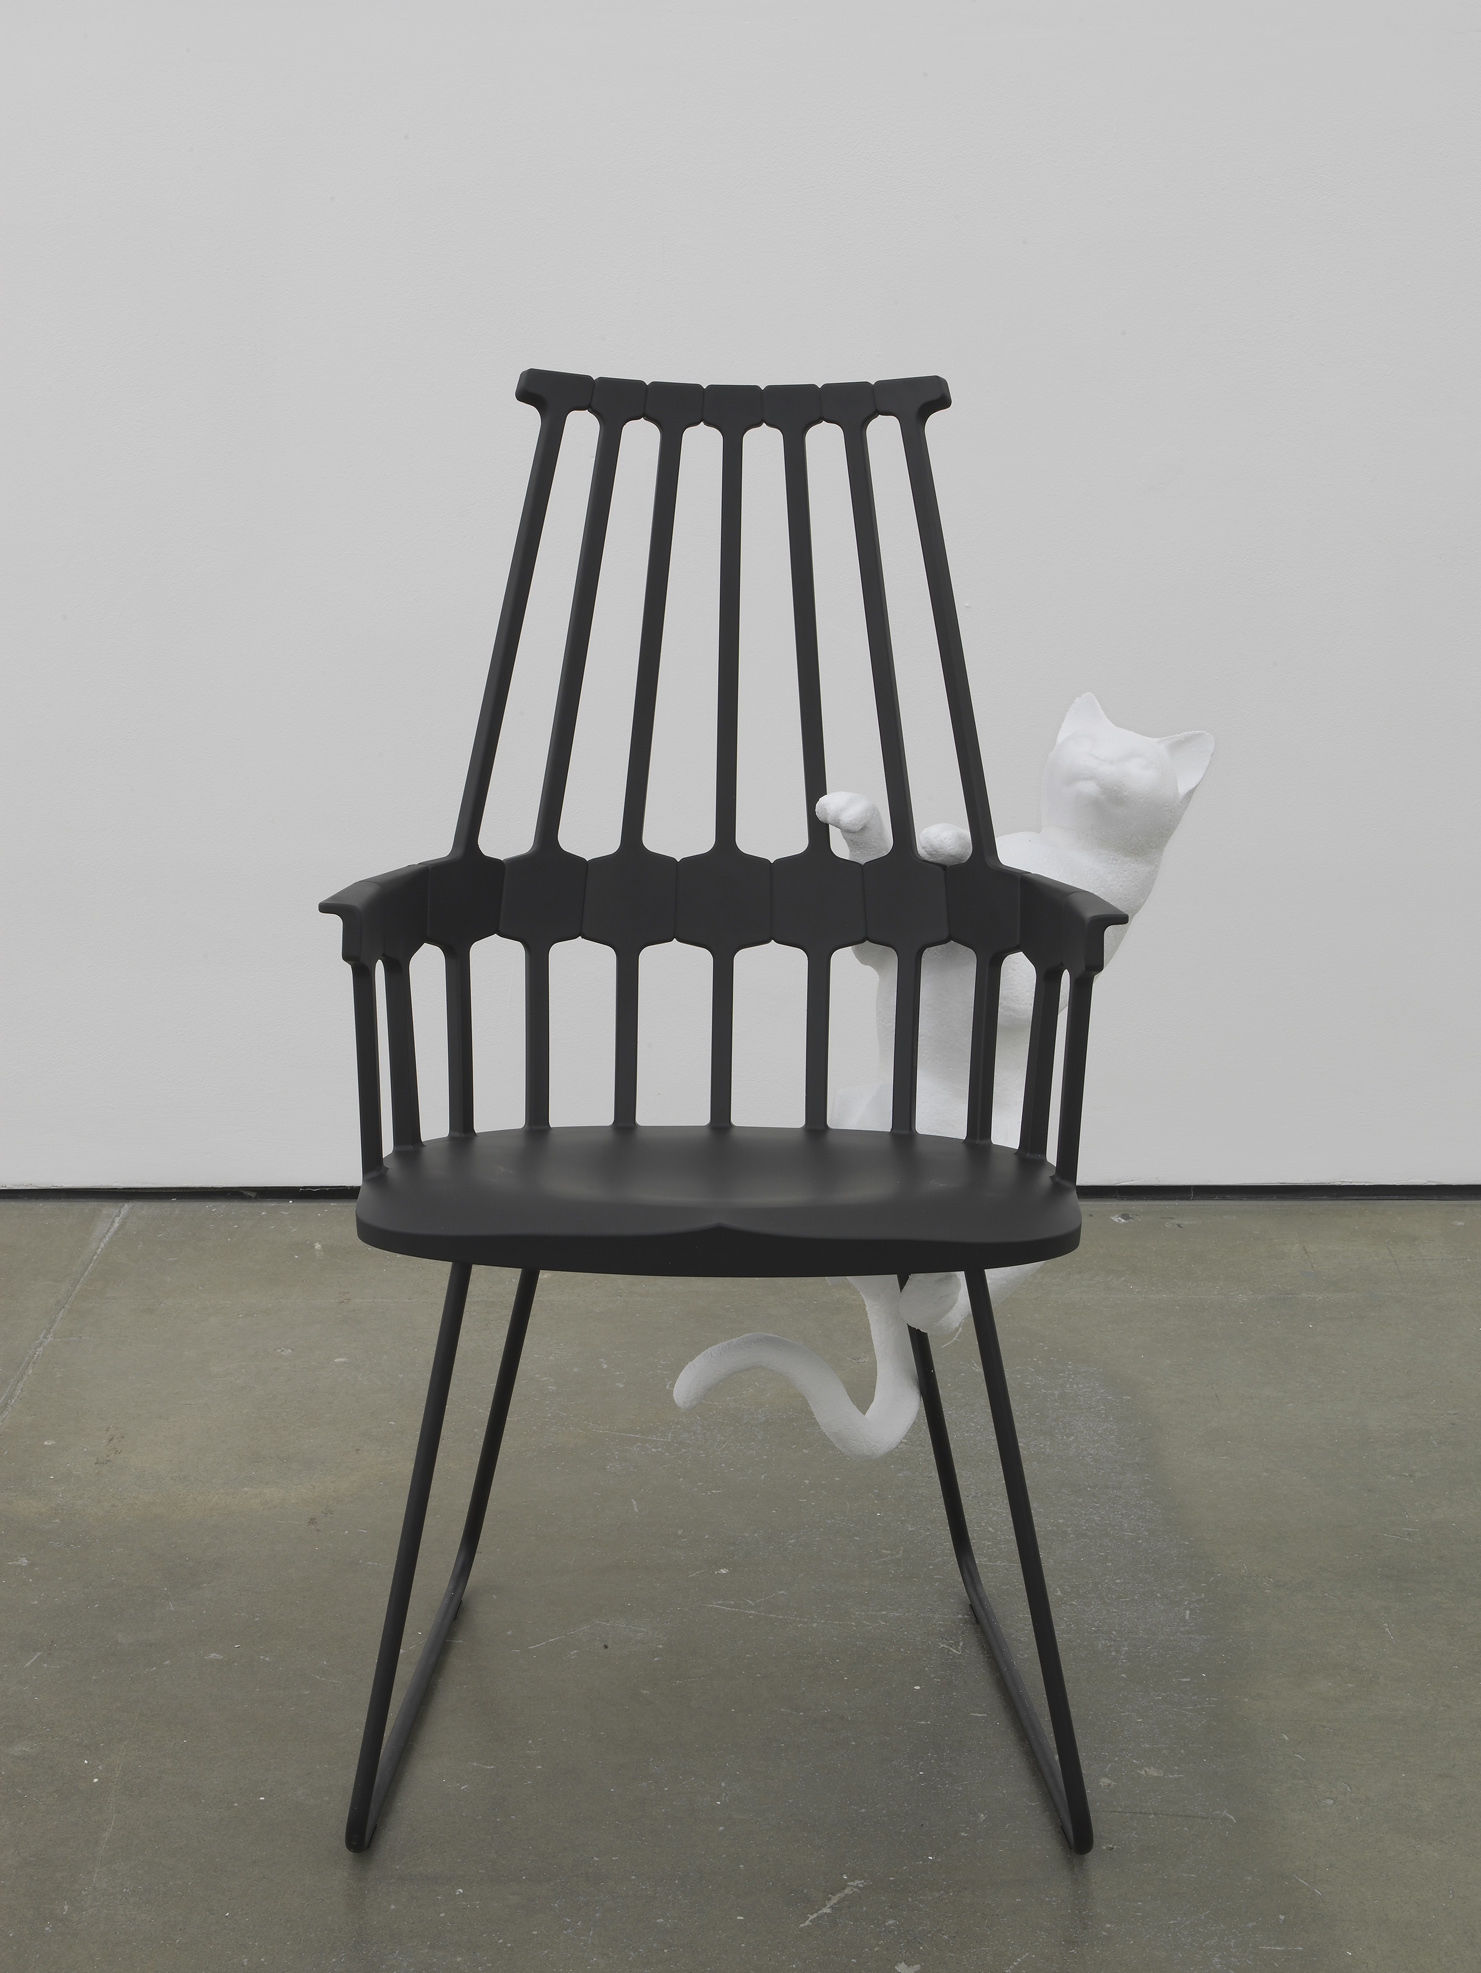     Leaping Cat  2014  Polystyrene and 21st century Windsor chair  98 x 72 x 60 m / 38.5 x 28.3 x 23.6 in 